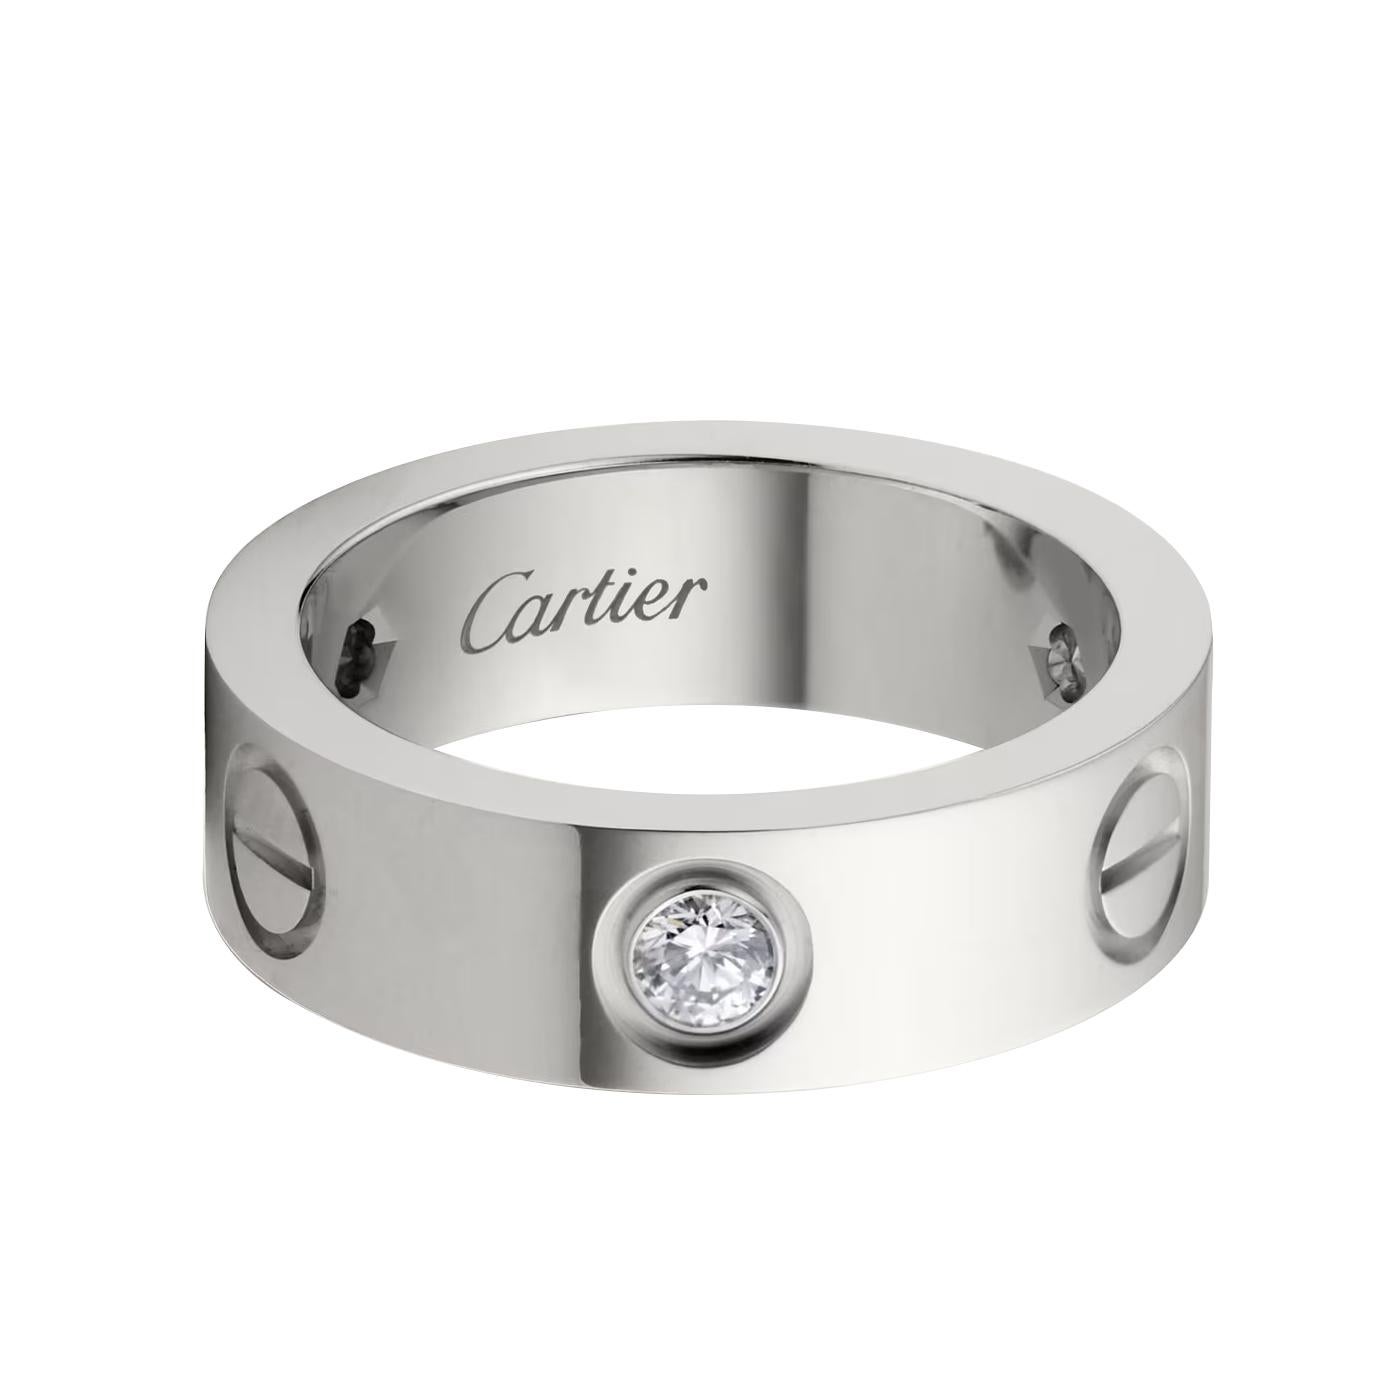 LOVE ring, white gold (750/1000), set with 3 brilliant-cut diamonds totaling 0.22 carats. Width: 5.5 mm (for size 60).

Details:
Brand: Cartier
Style: Love Ring
Carat Weight: 0.22 Carats
Stone: 3 Brilliant-Cut Diamonds 
Material: White Gold
Size: